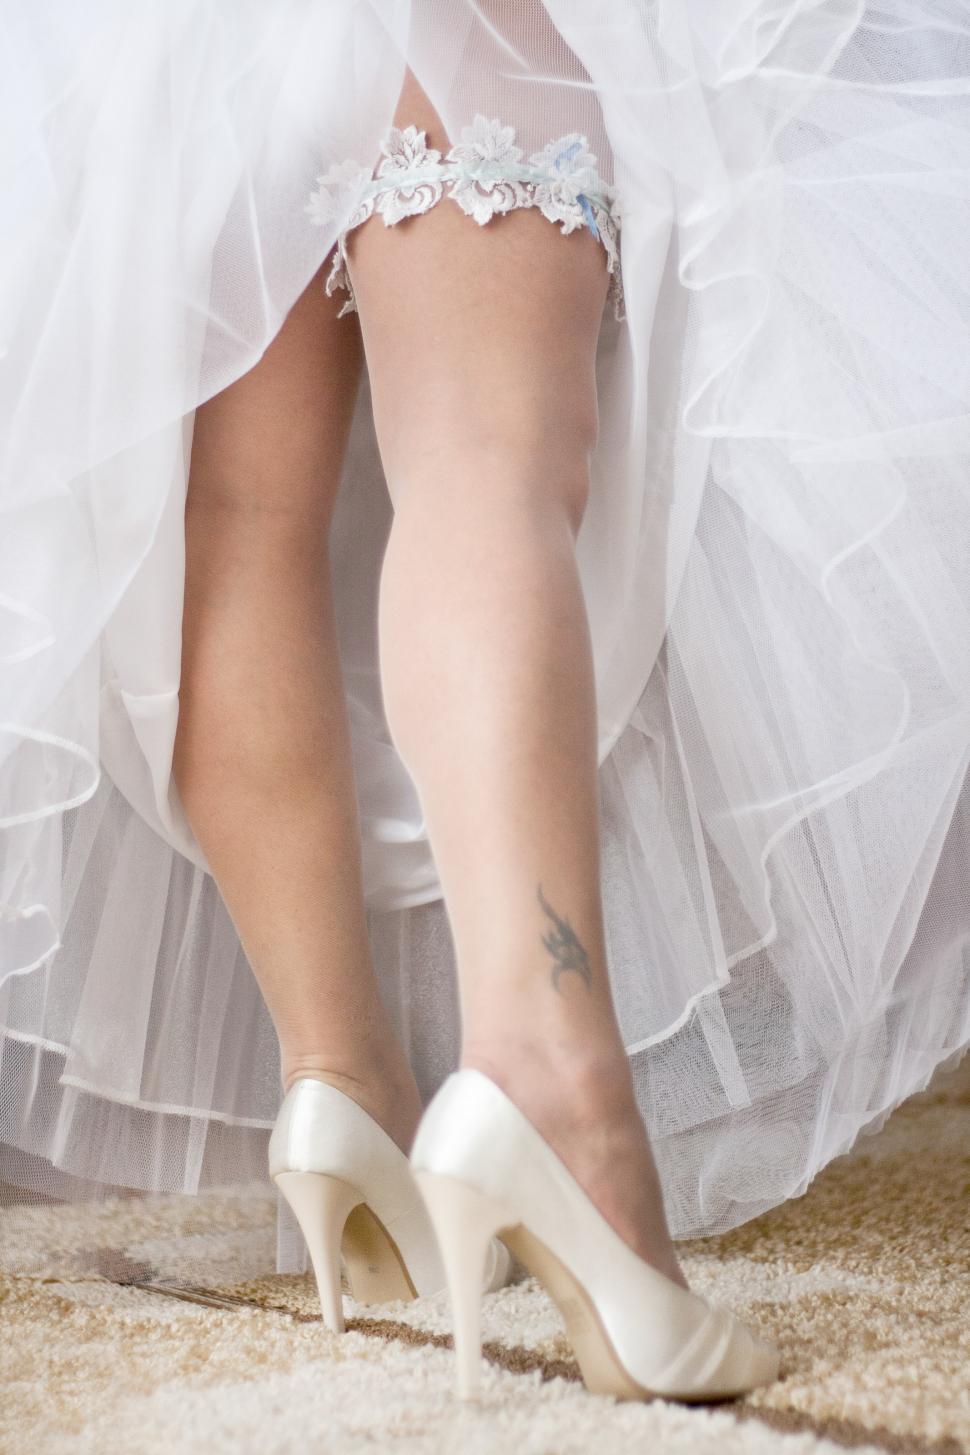 Free Image of Woman in White Dress and High Heels 